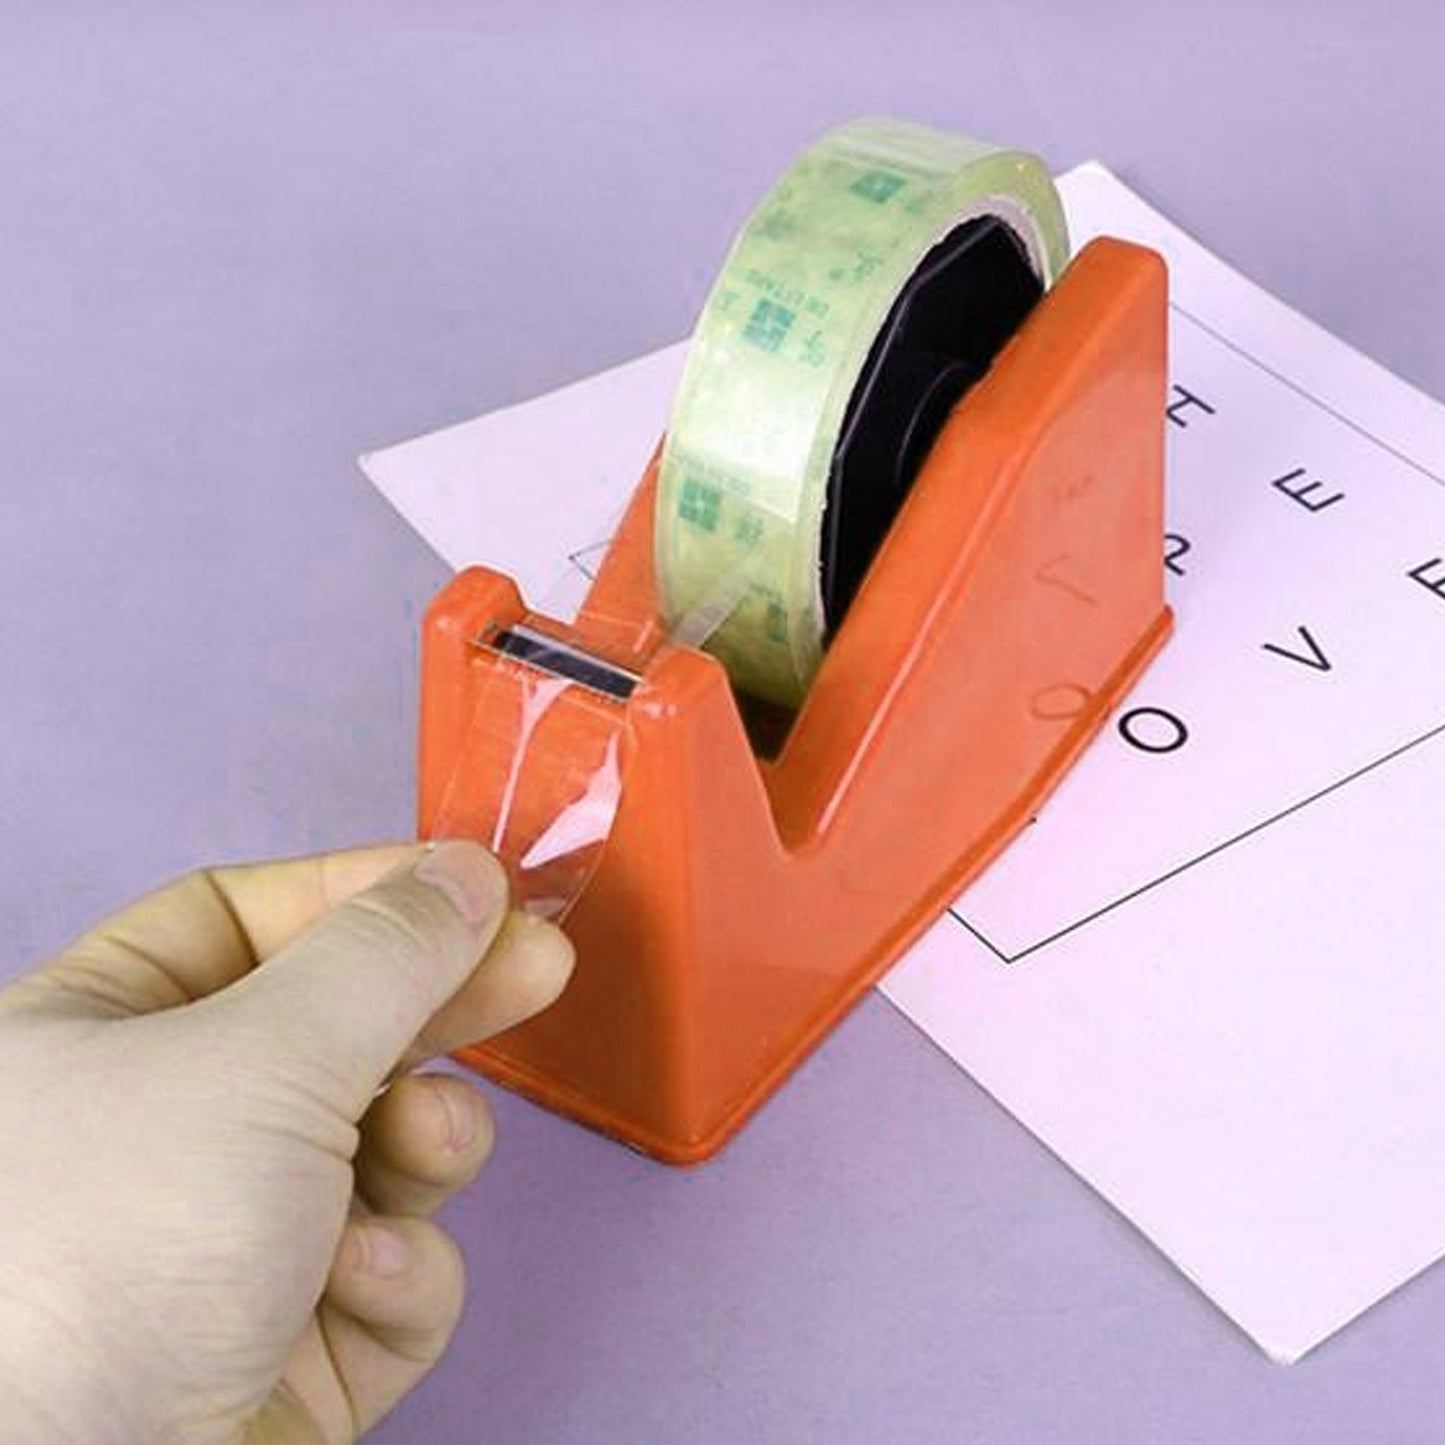 9011A Jumbo Tape Dispenser used in all kinds of household and official places for holding and cutting tapes etc. 